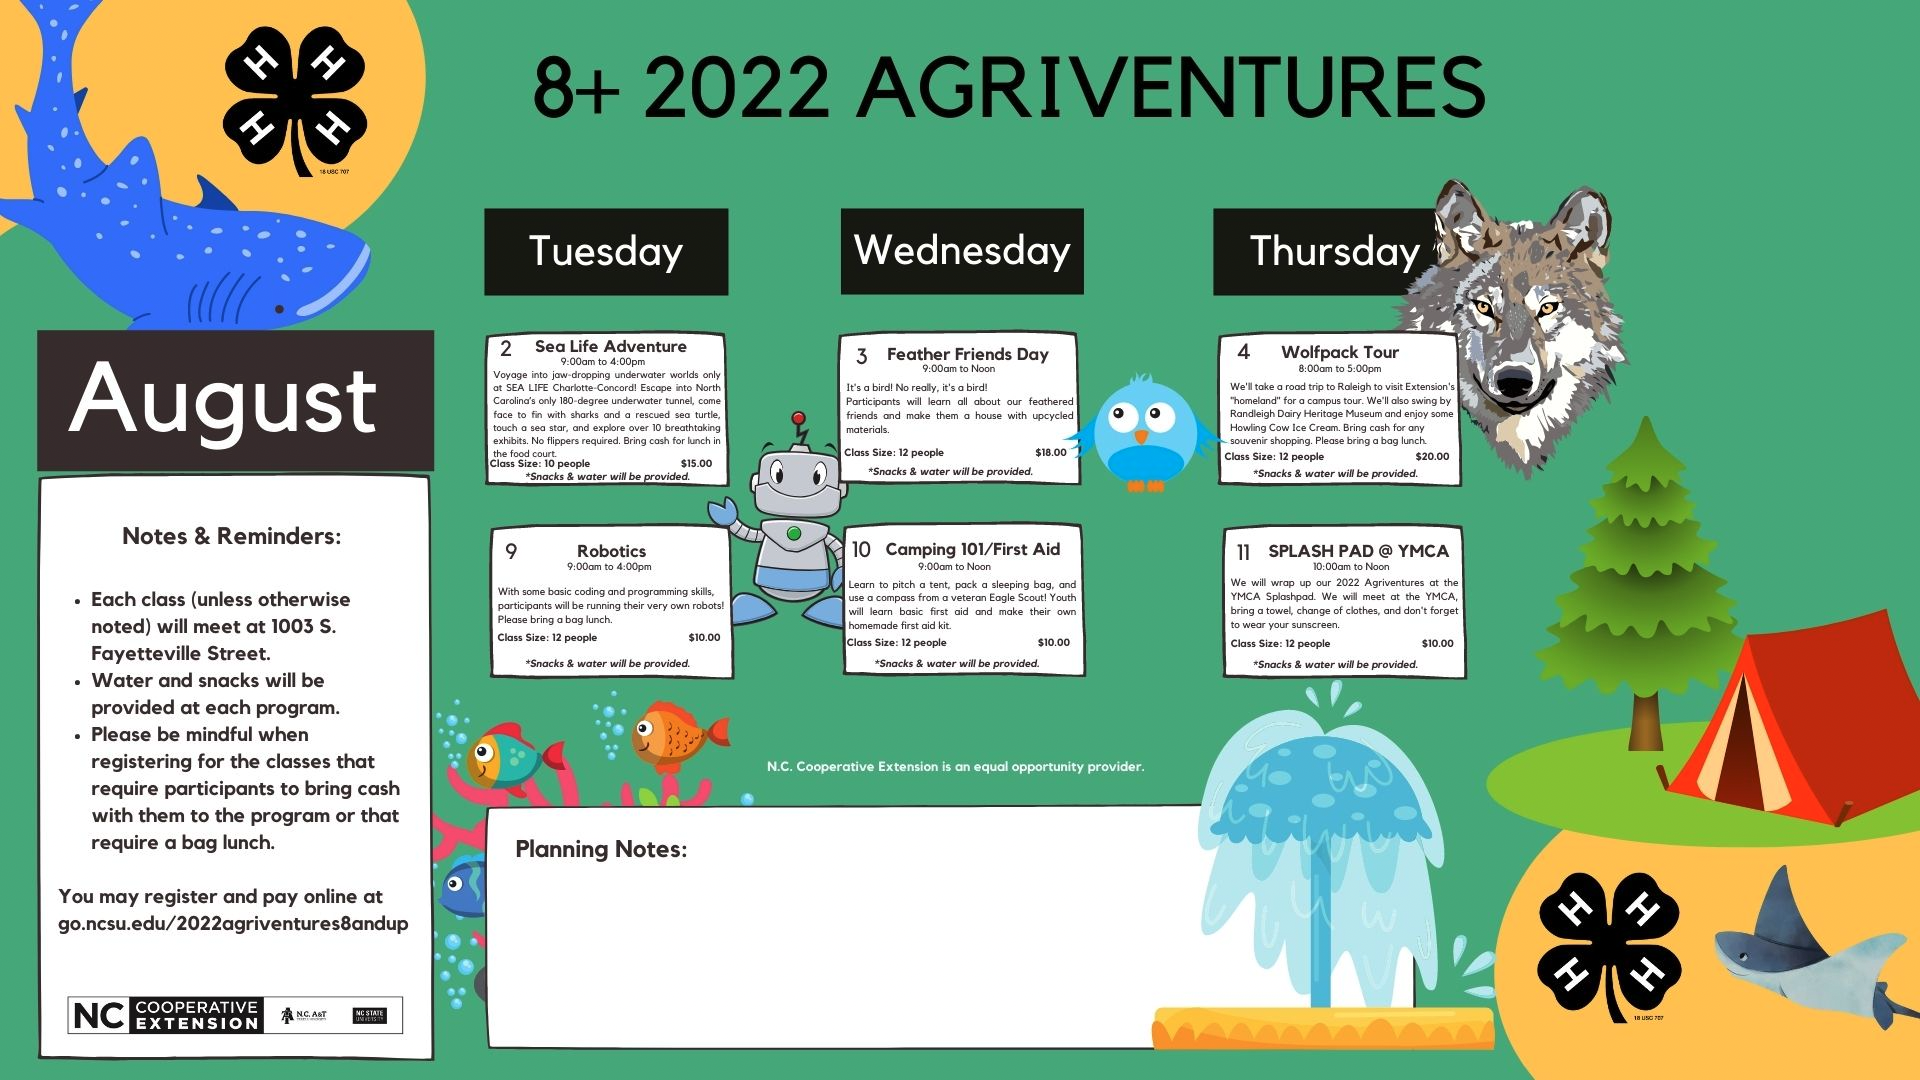 August 2022 Agriventures class calendar for 8+ year olds